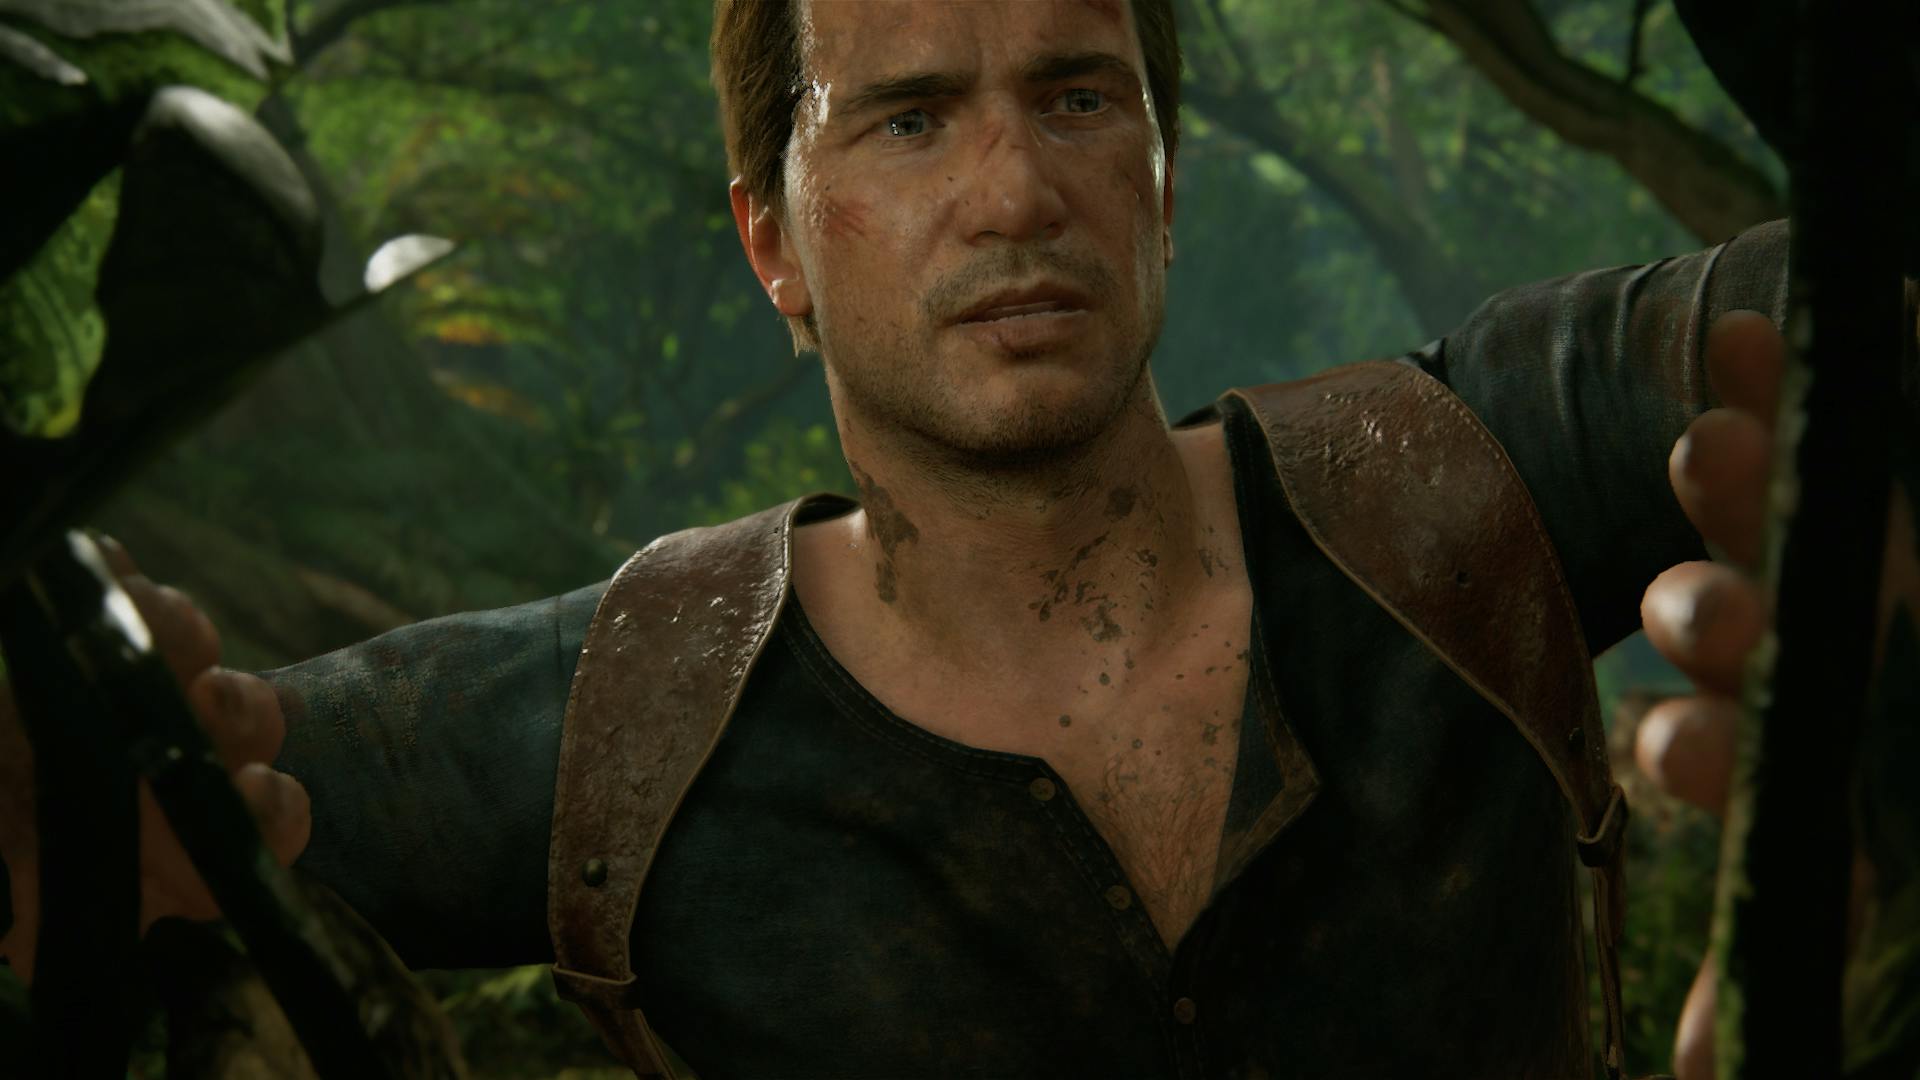 Metacritic - Uncharted 4: A Thief's End [Metascore = *94*] The stellar  reviews are coming in. Clear contender for Game of the Year (61 reviews in  so far)   GameSpot: In its